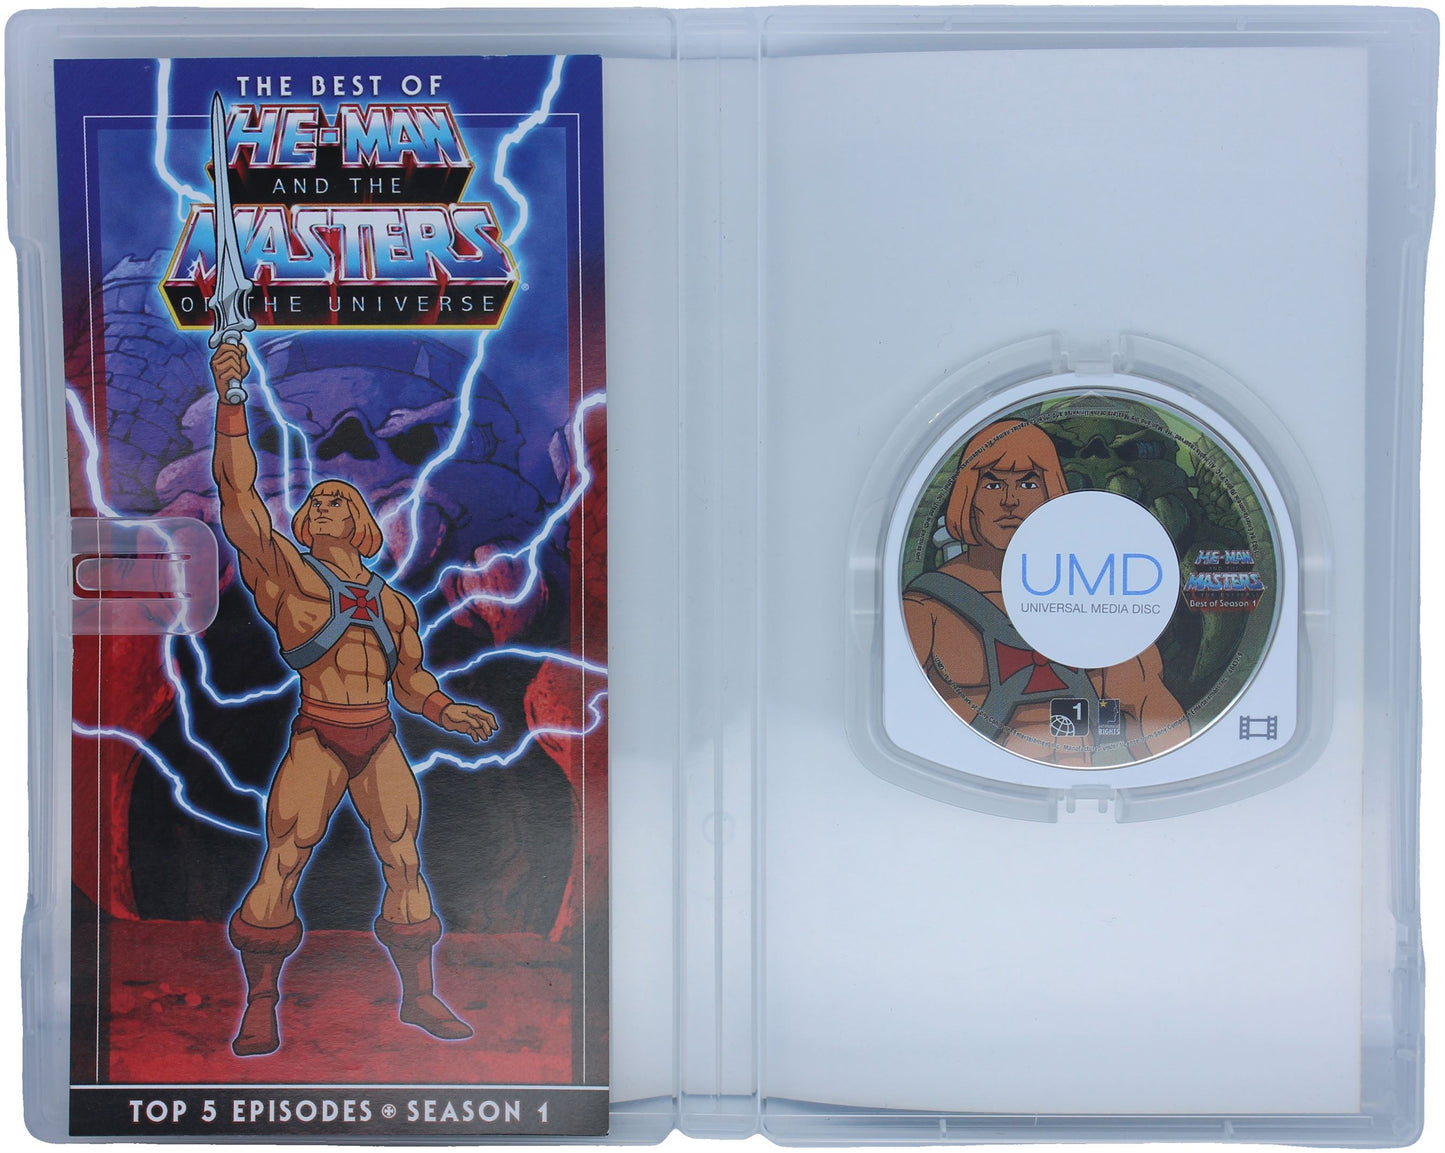 The Best Of He-Man And The Masters Of The Universe [UMD Video]